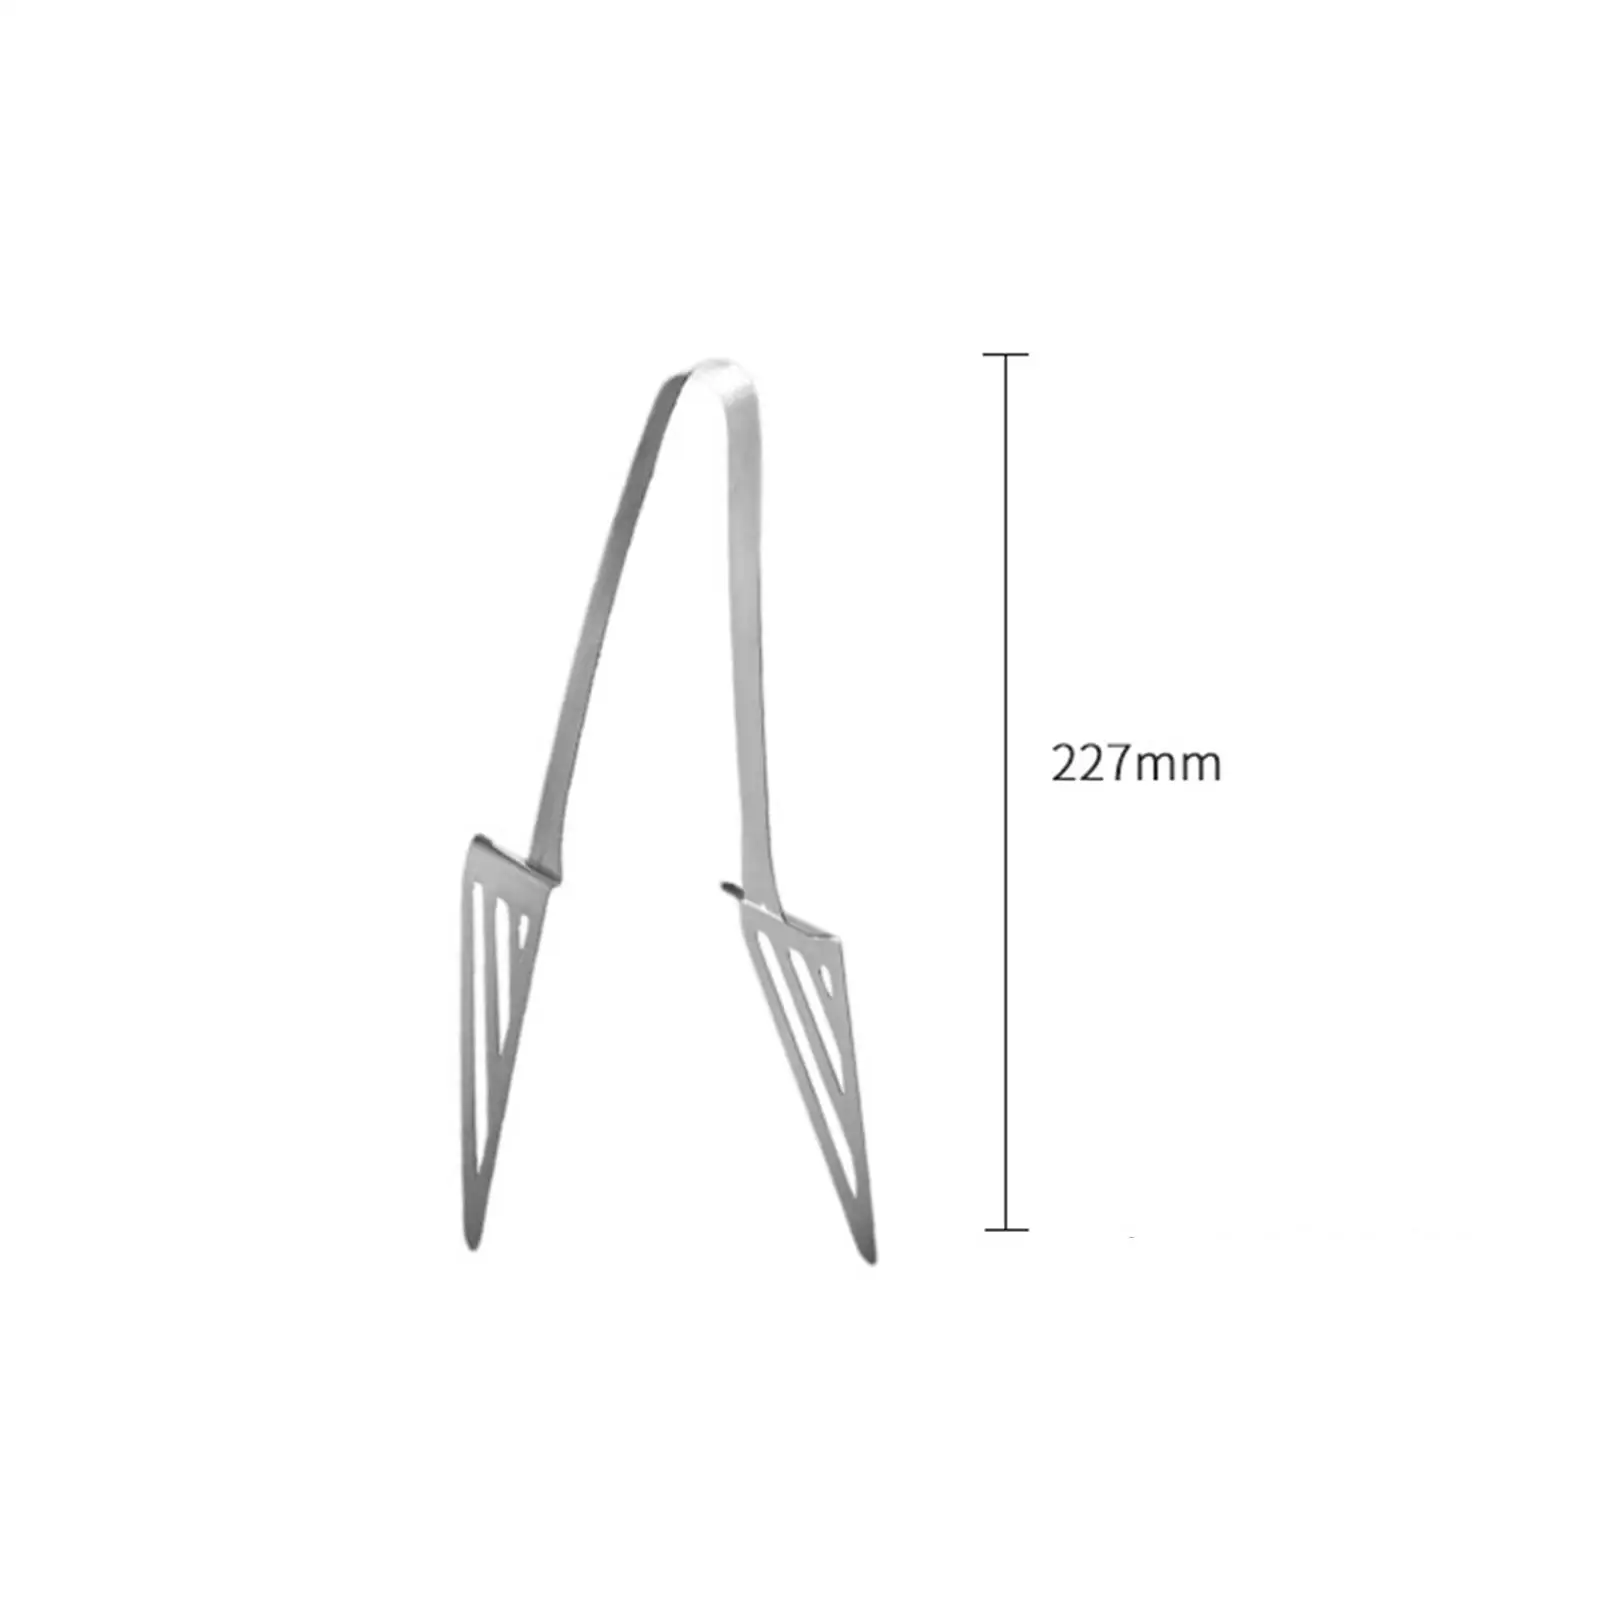 Food Tongs Food Clip Kitchenware Kitchen Tools Stainless Steel Pastry Serving Tongs for Home Barbecue Bakery Party BBQ